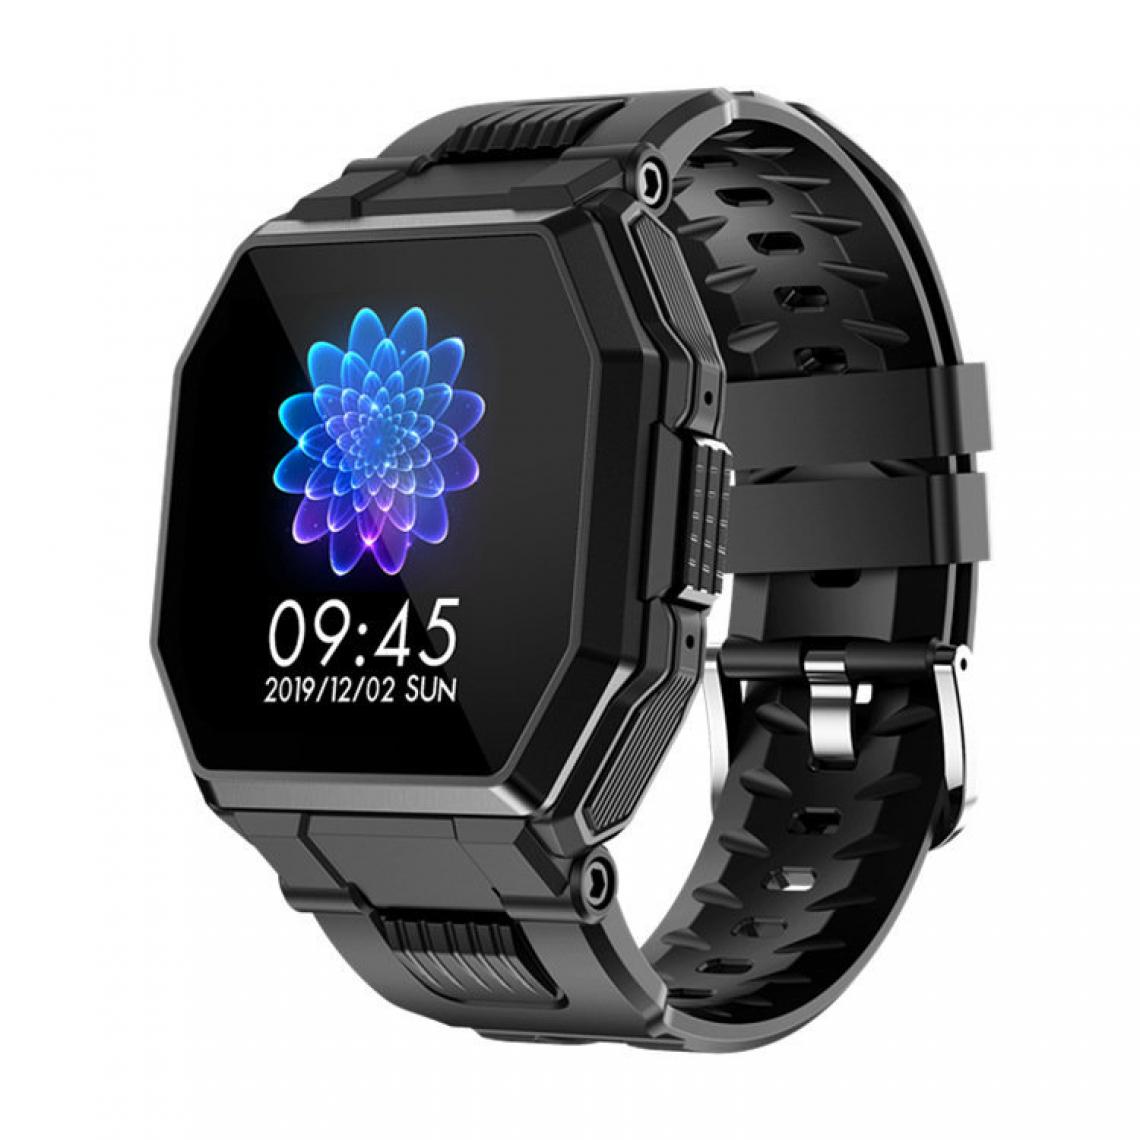 Chronotech Montres - Smart Watch S9 Smart watch with Bluetooth call, full touch, blood pressure and heart rate monitoring, sports fitness tracker(black) - Montre connectée